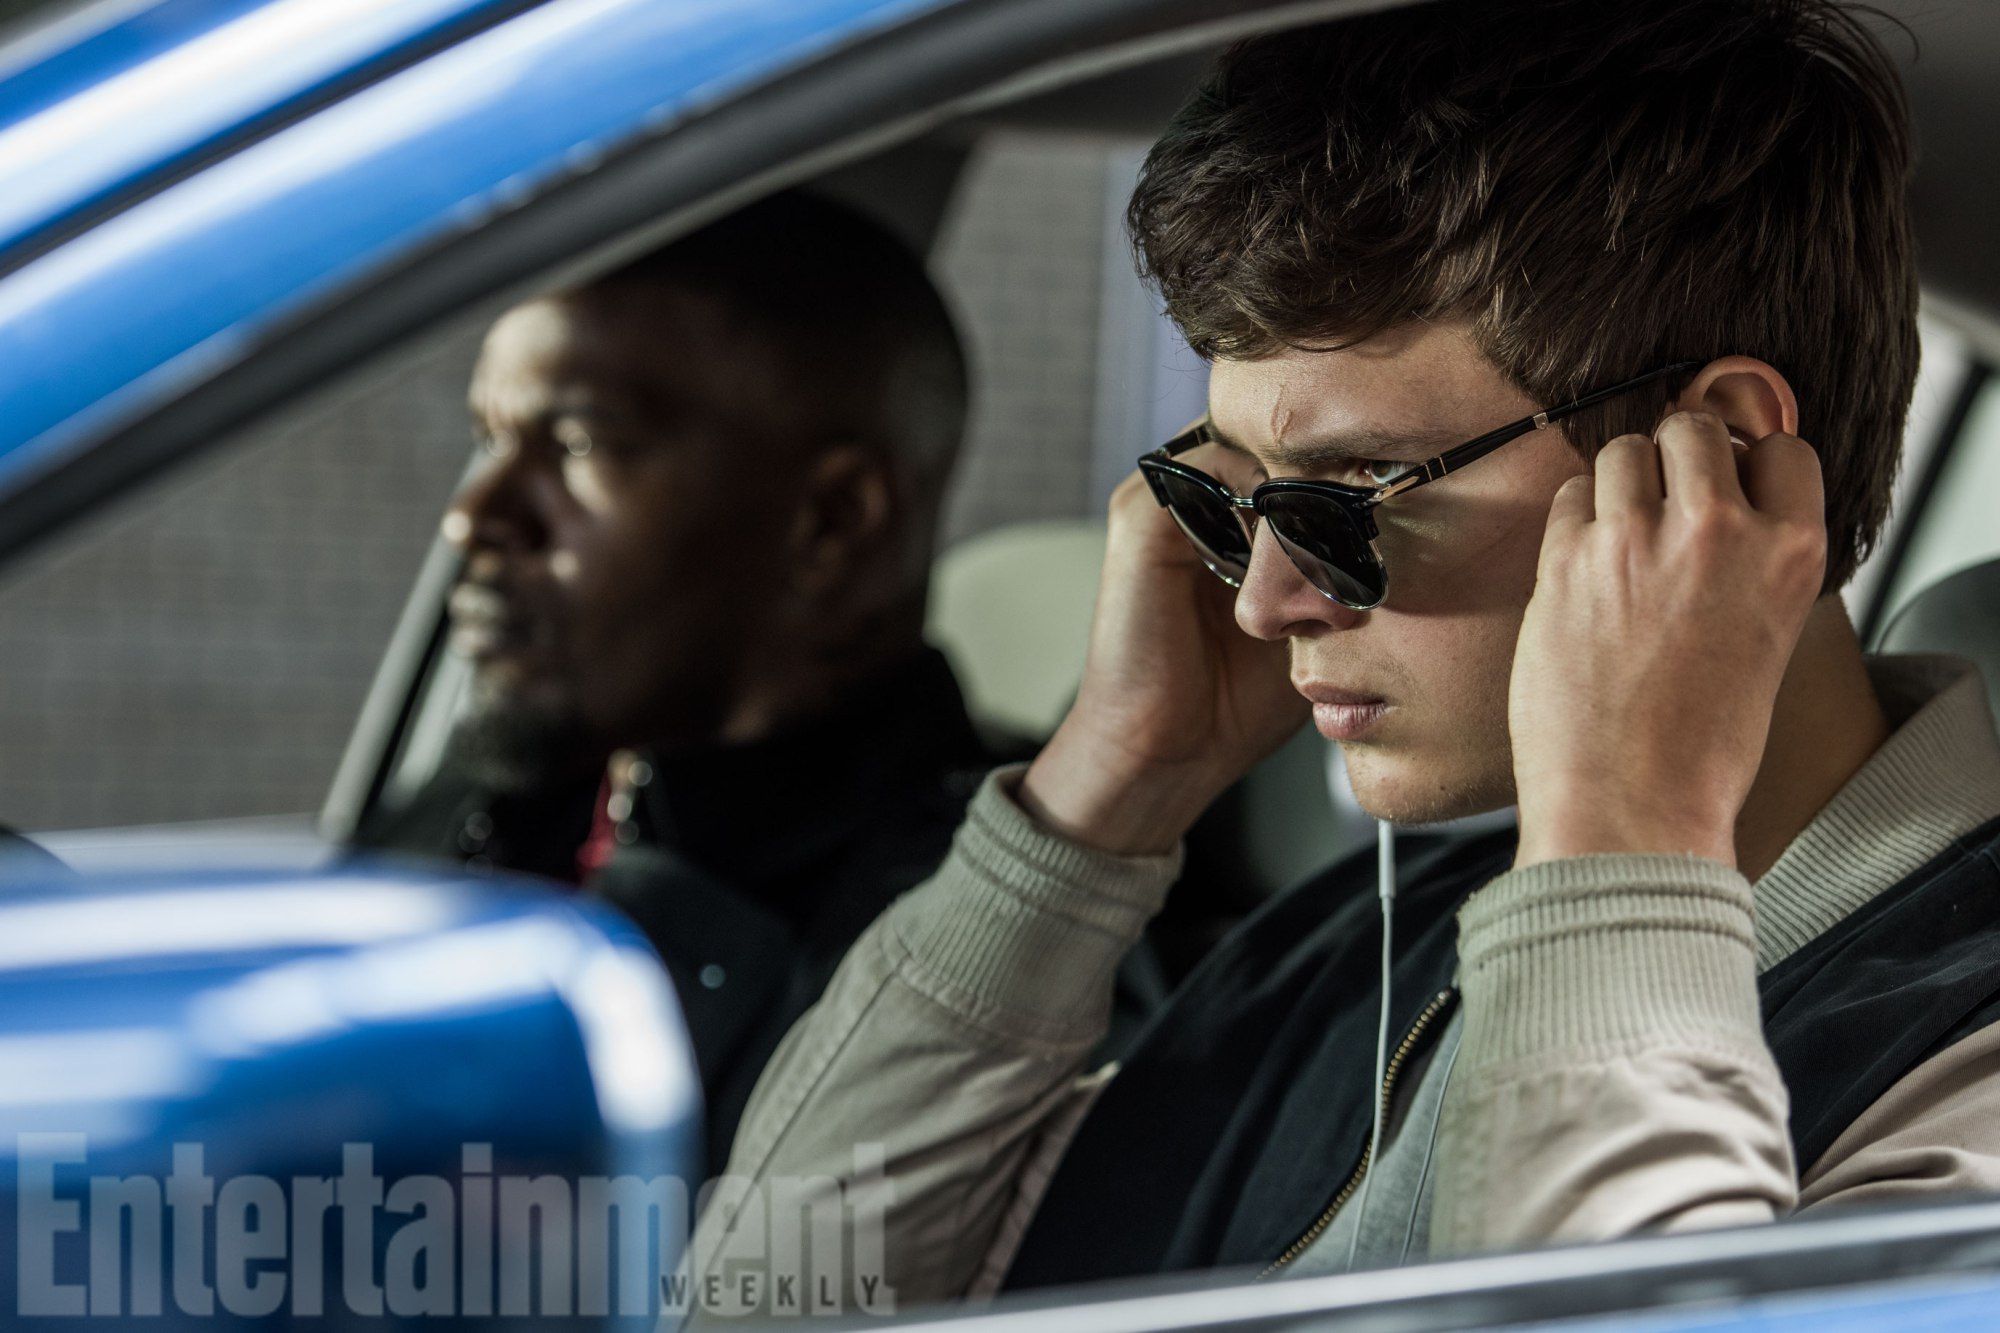 Baby (ANSEL ELGORT) and Bats (JAMIE FOXX) on the way to the post office job with Buddy (JON HAMM) and Darling (EIZA GONZALEZ) as cops pull up next to them in TriStar Pictures' BABY DRIVER.